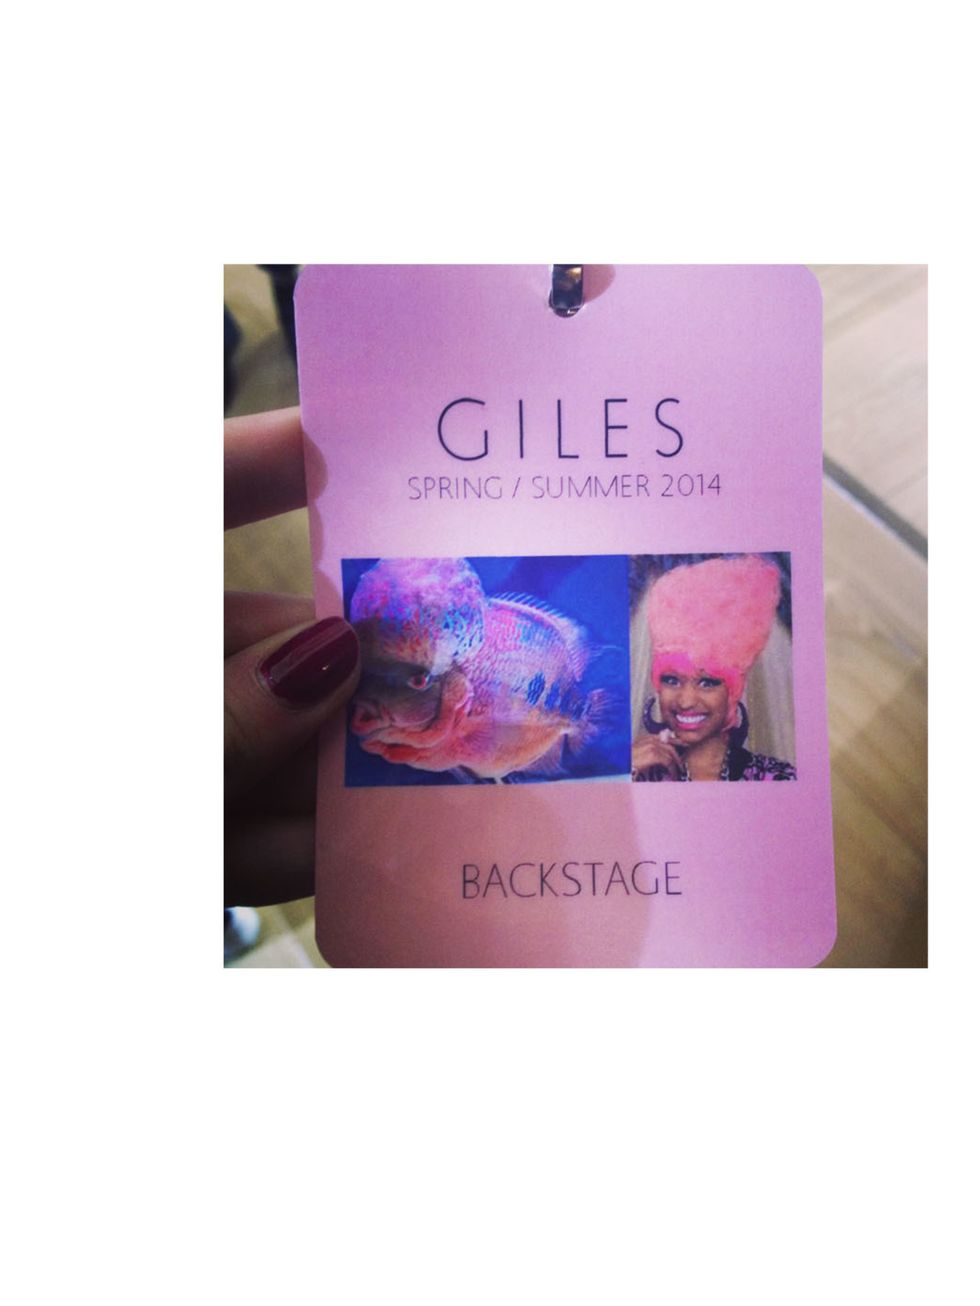 <p>Backstage passes at Giles - brilliant. Nicki Mianj's look-a-like</p>